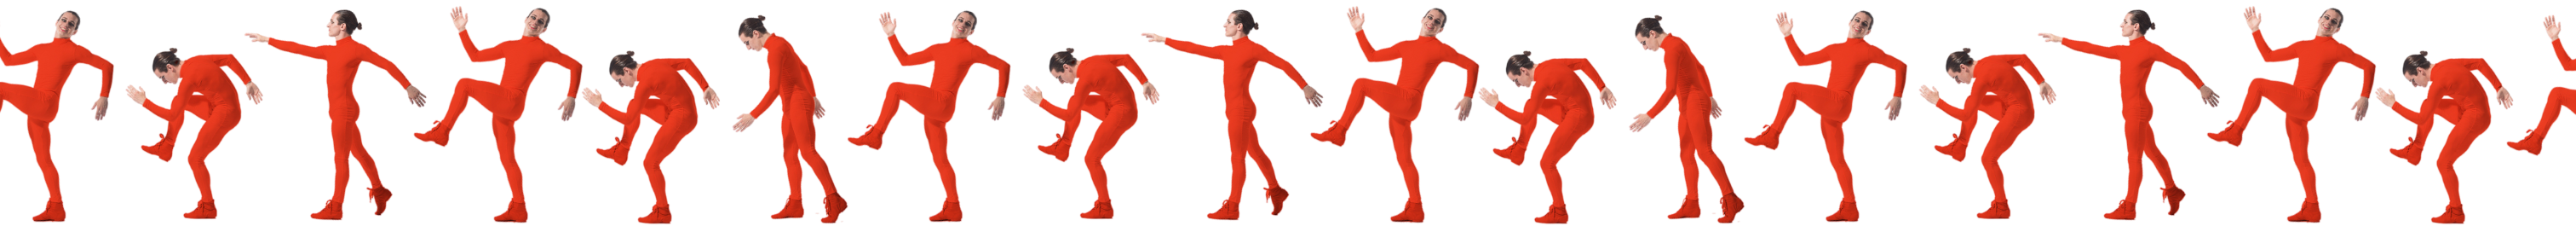 a dancer in red marching across the screen